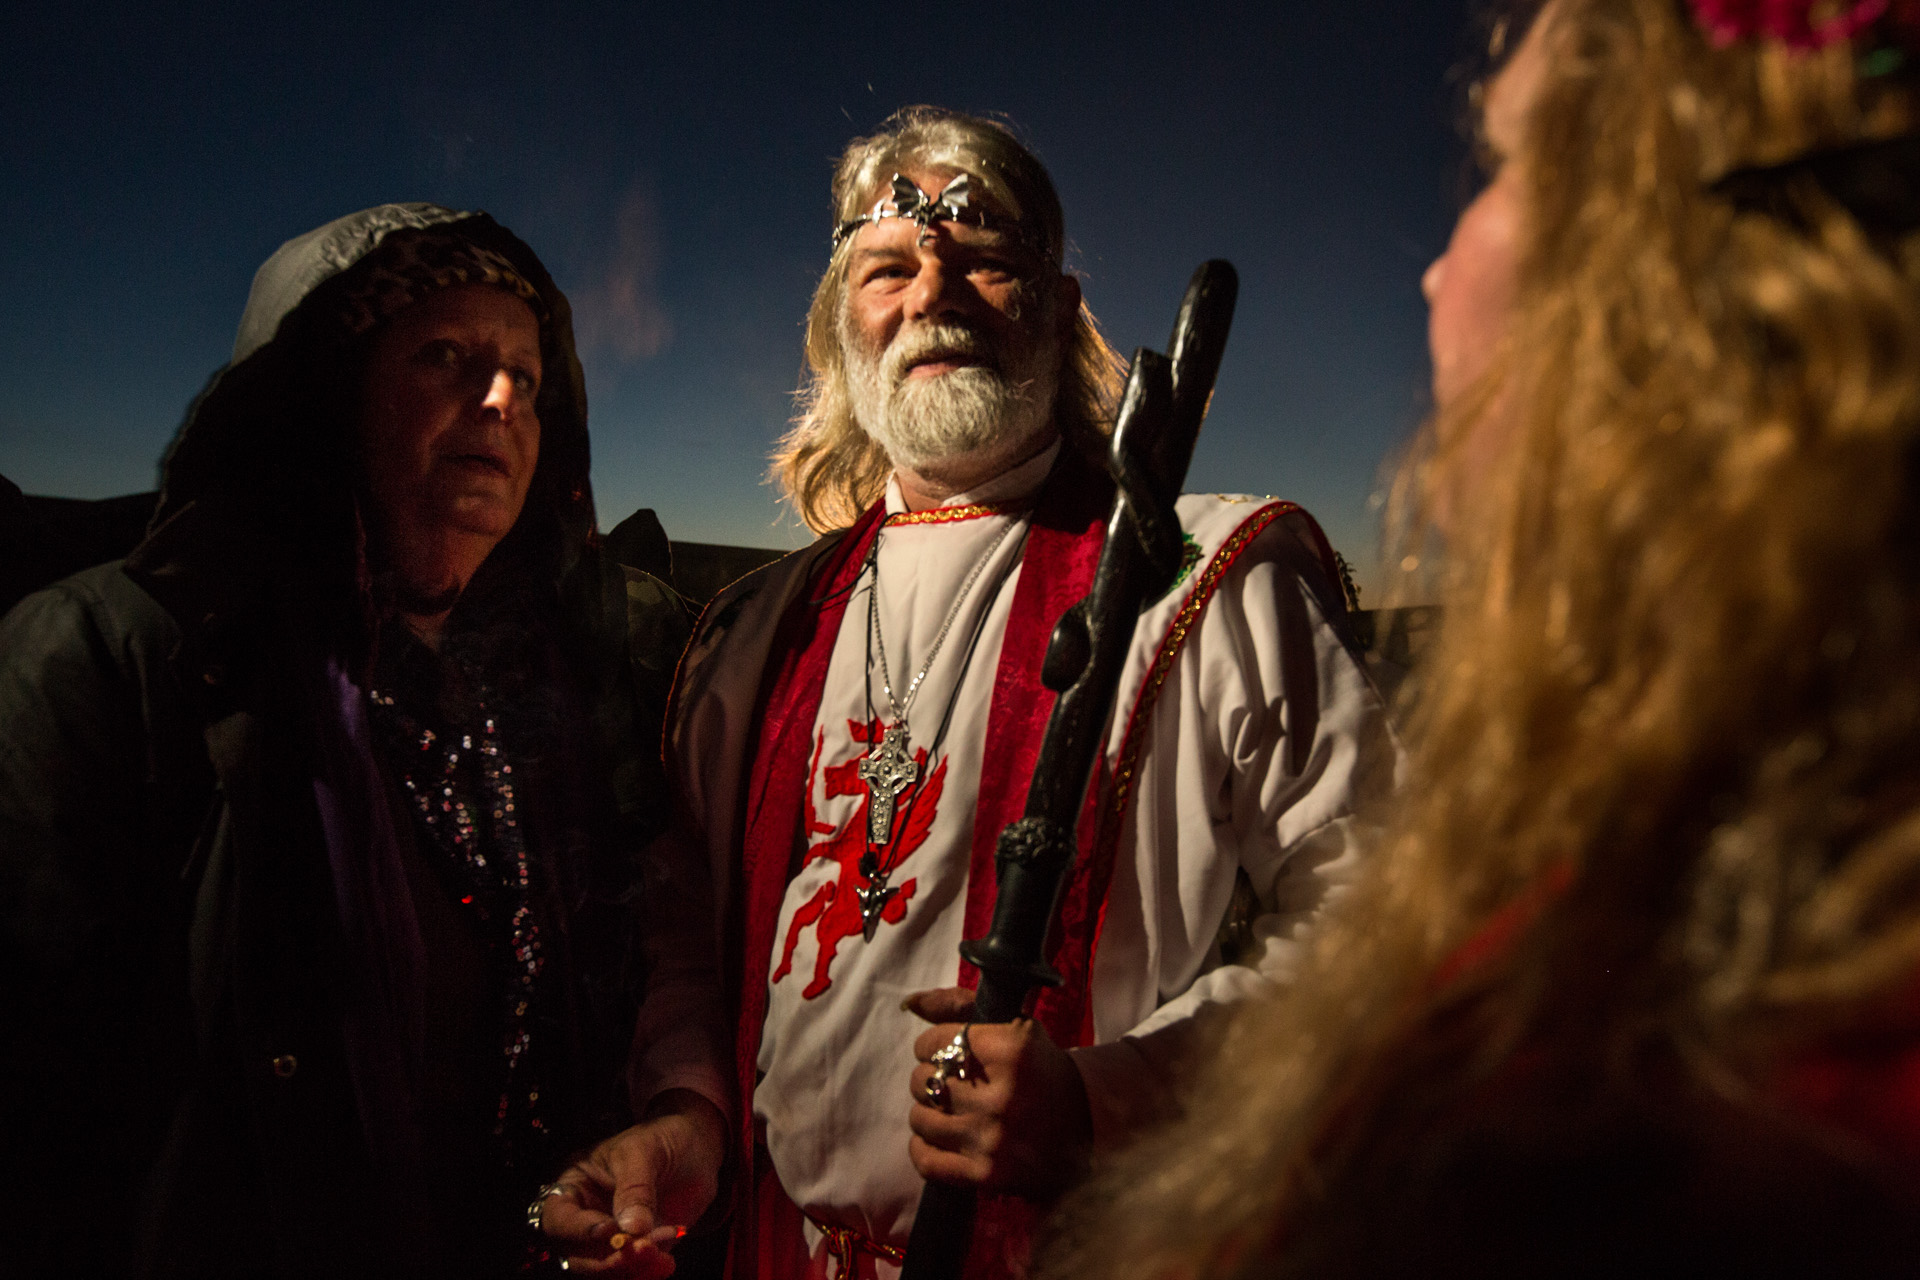  John Timothy Rothwell, an English eco-campaigner and neo-druid leader, is the head of a group of lay knights and considers himself the legitimate descendant of King Arthur. At the autumn equinox he gathers with Arthurian friends at Stonehenge to per